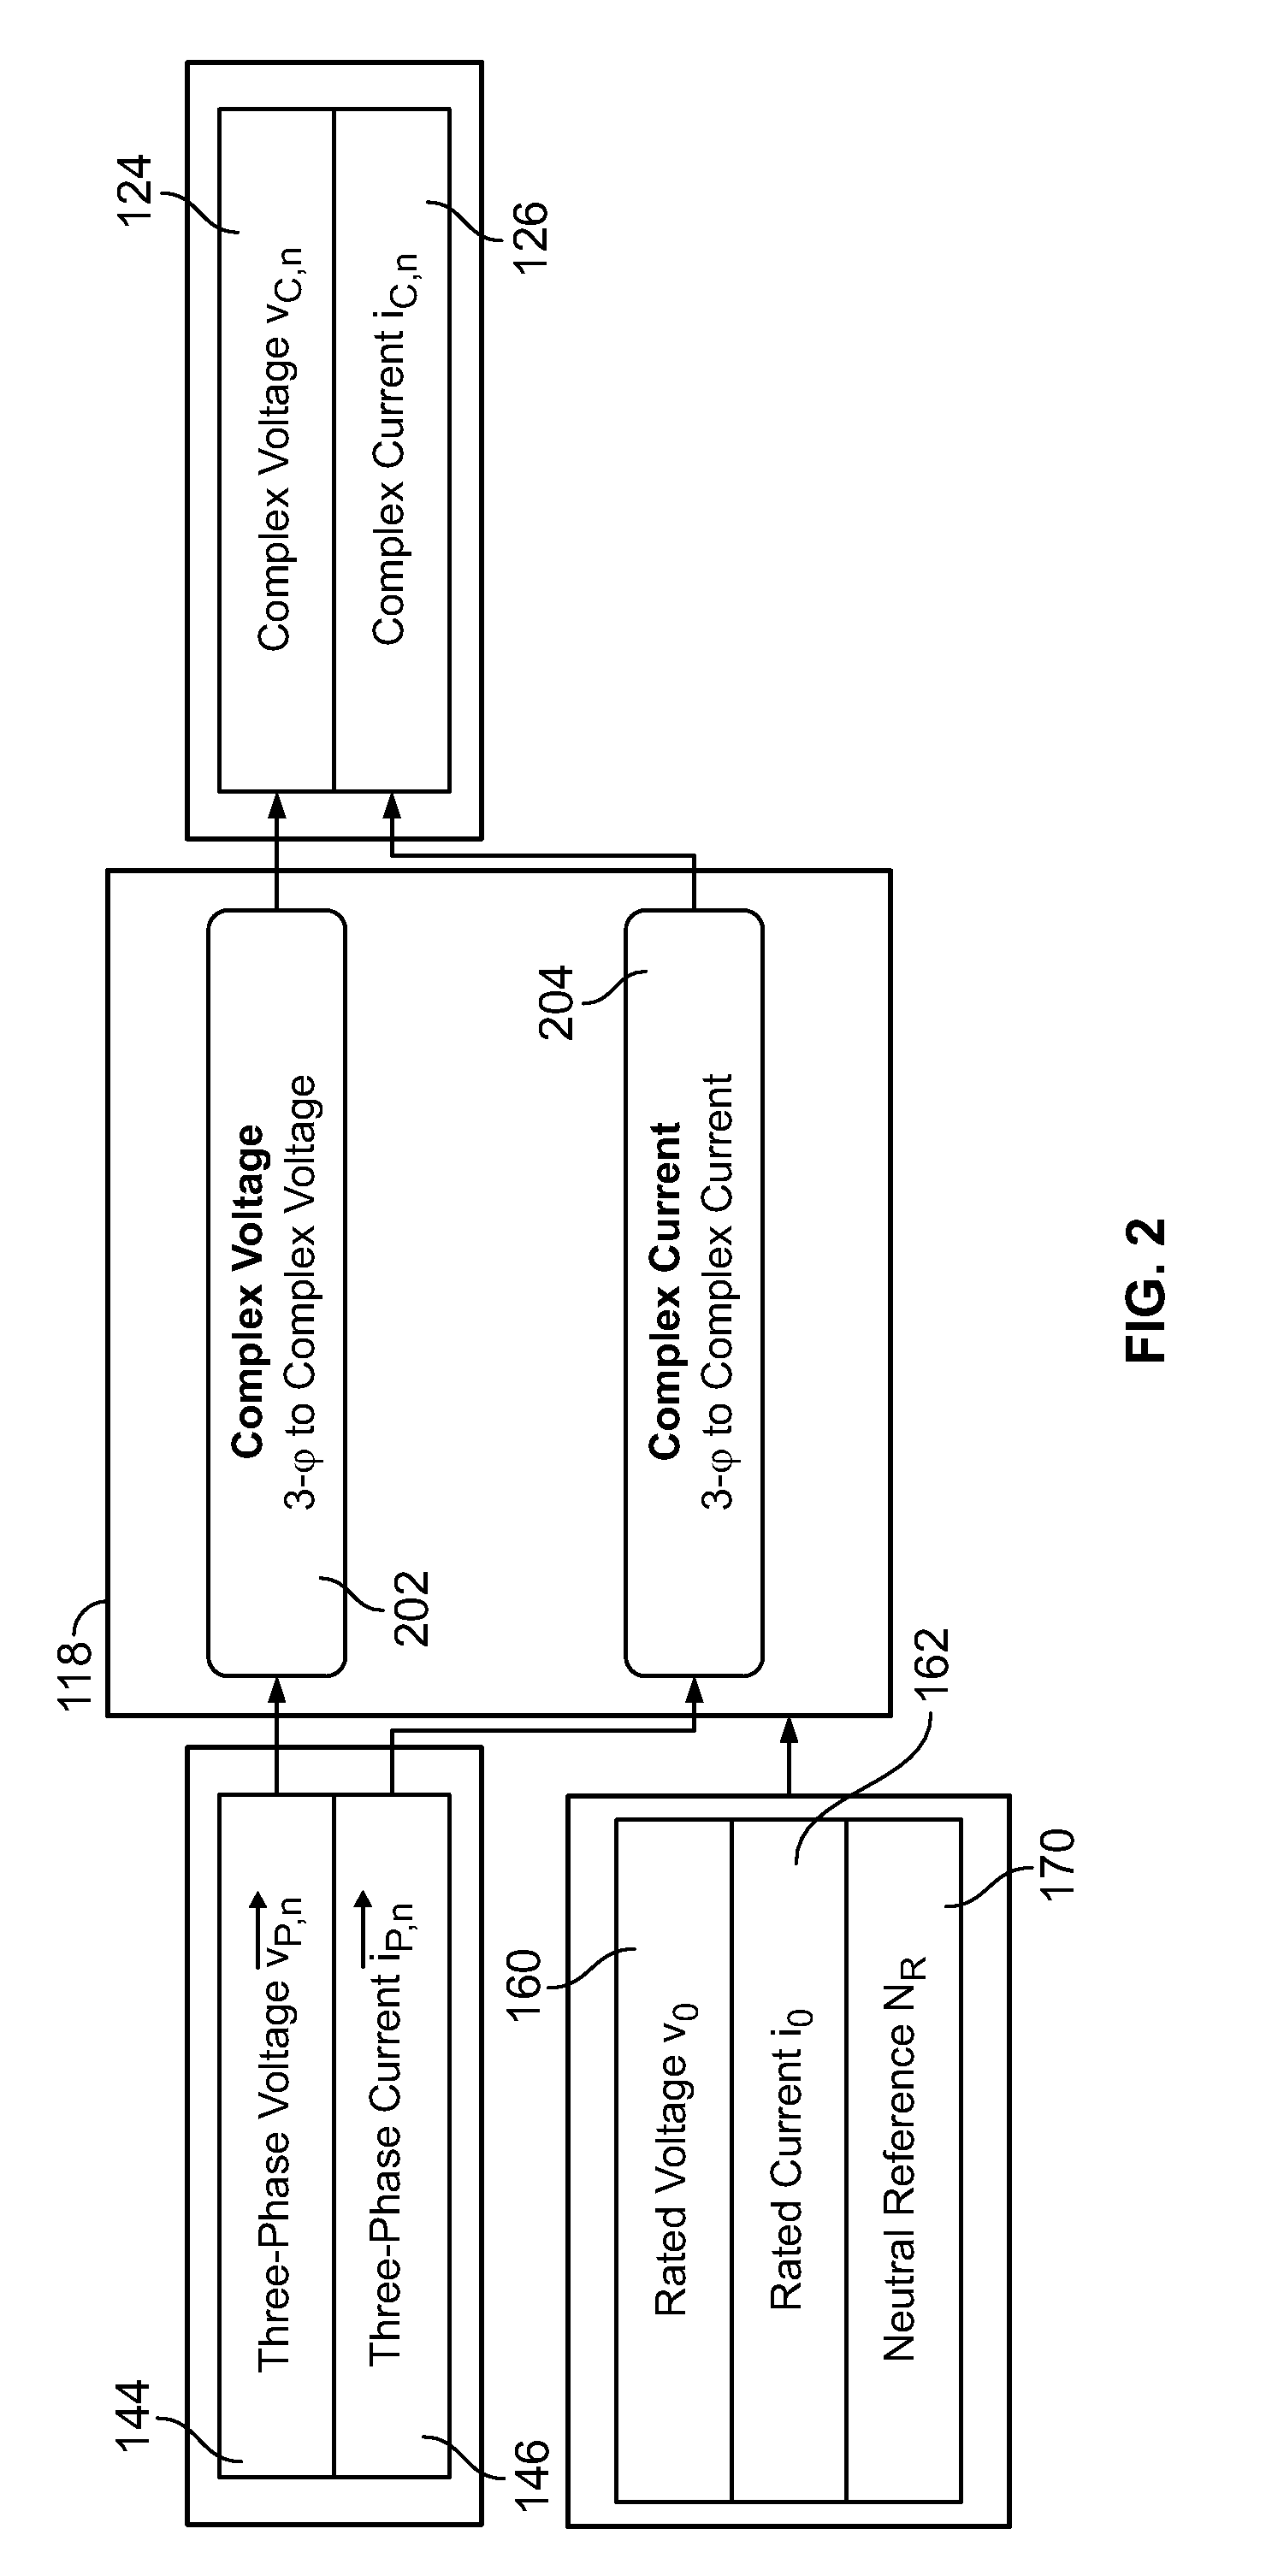 Methods and apparatuses for estimating transient slip